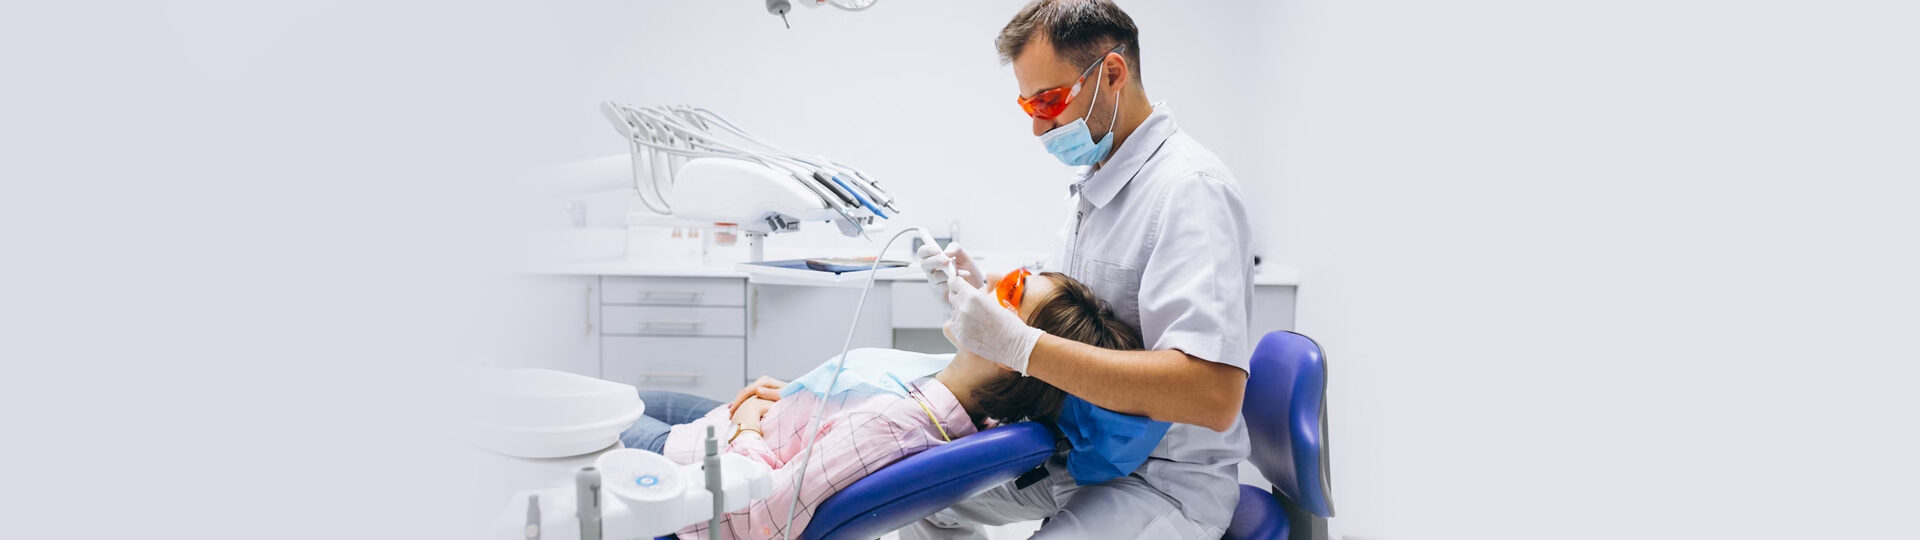 4 Things to Avoid After Dental Implant Surgery